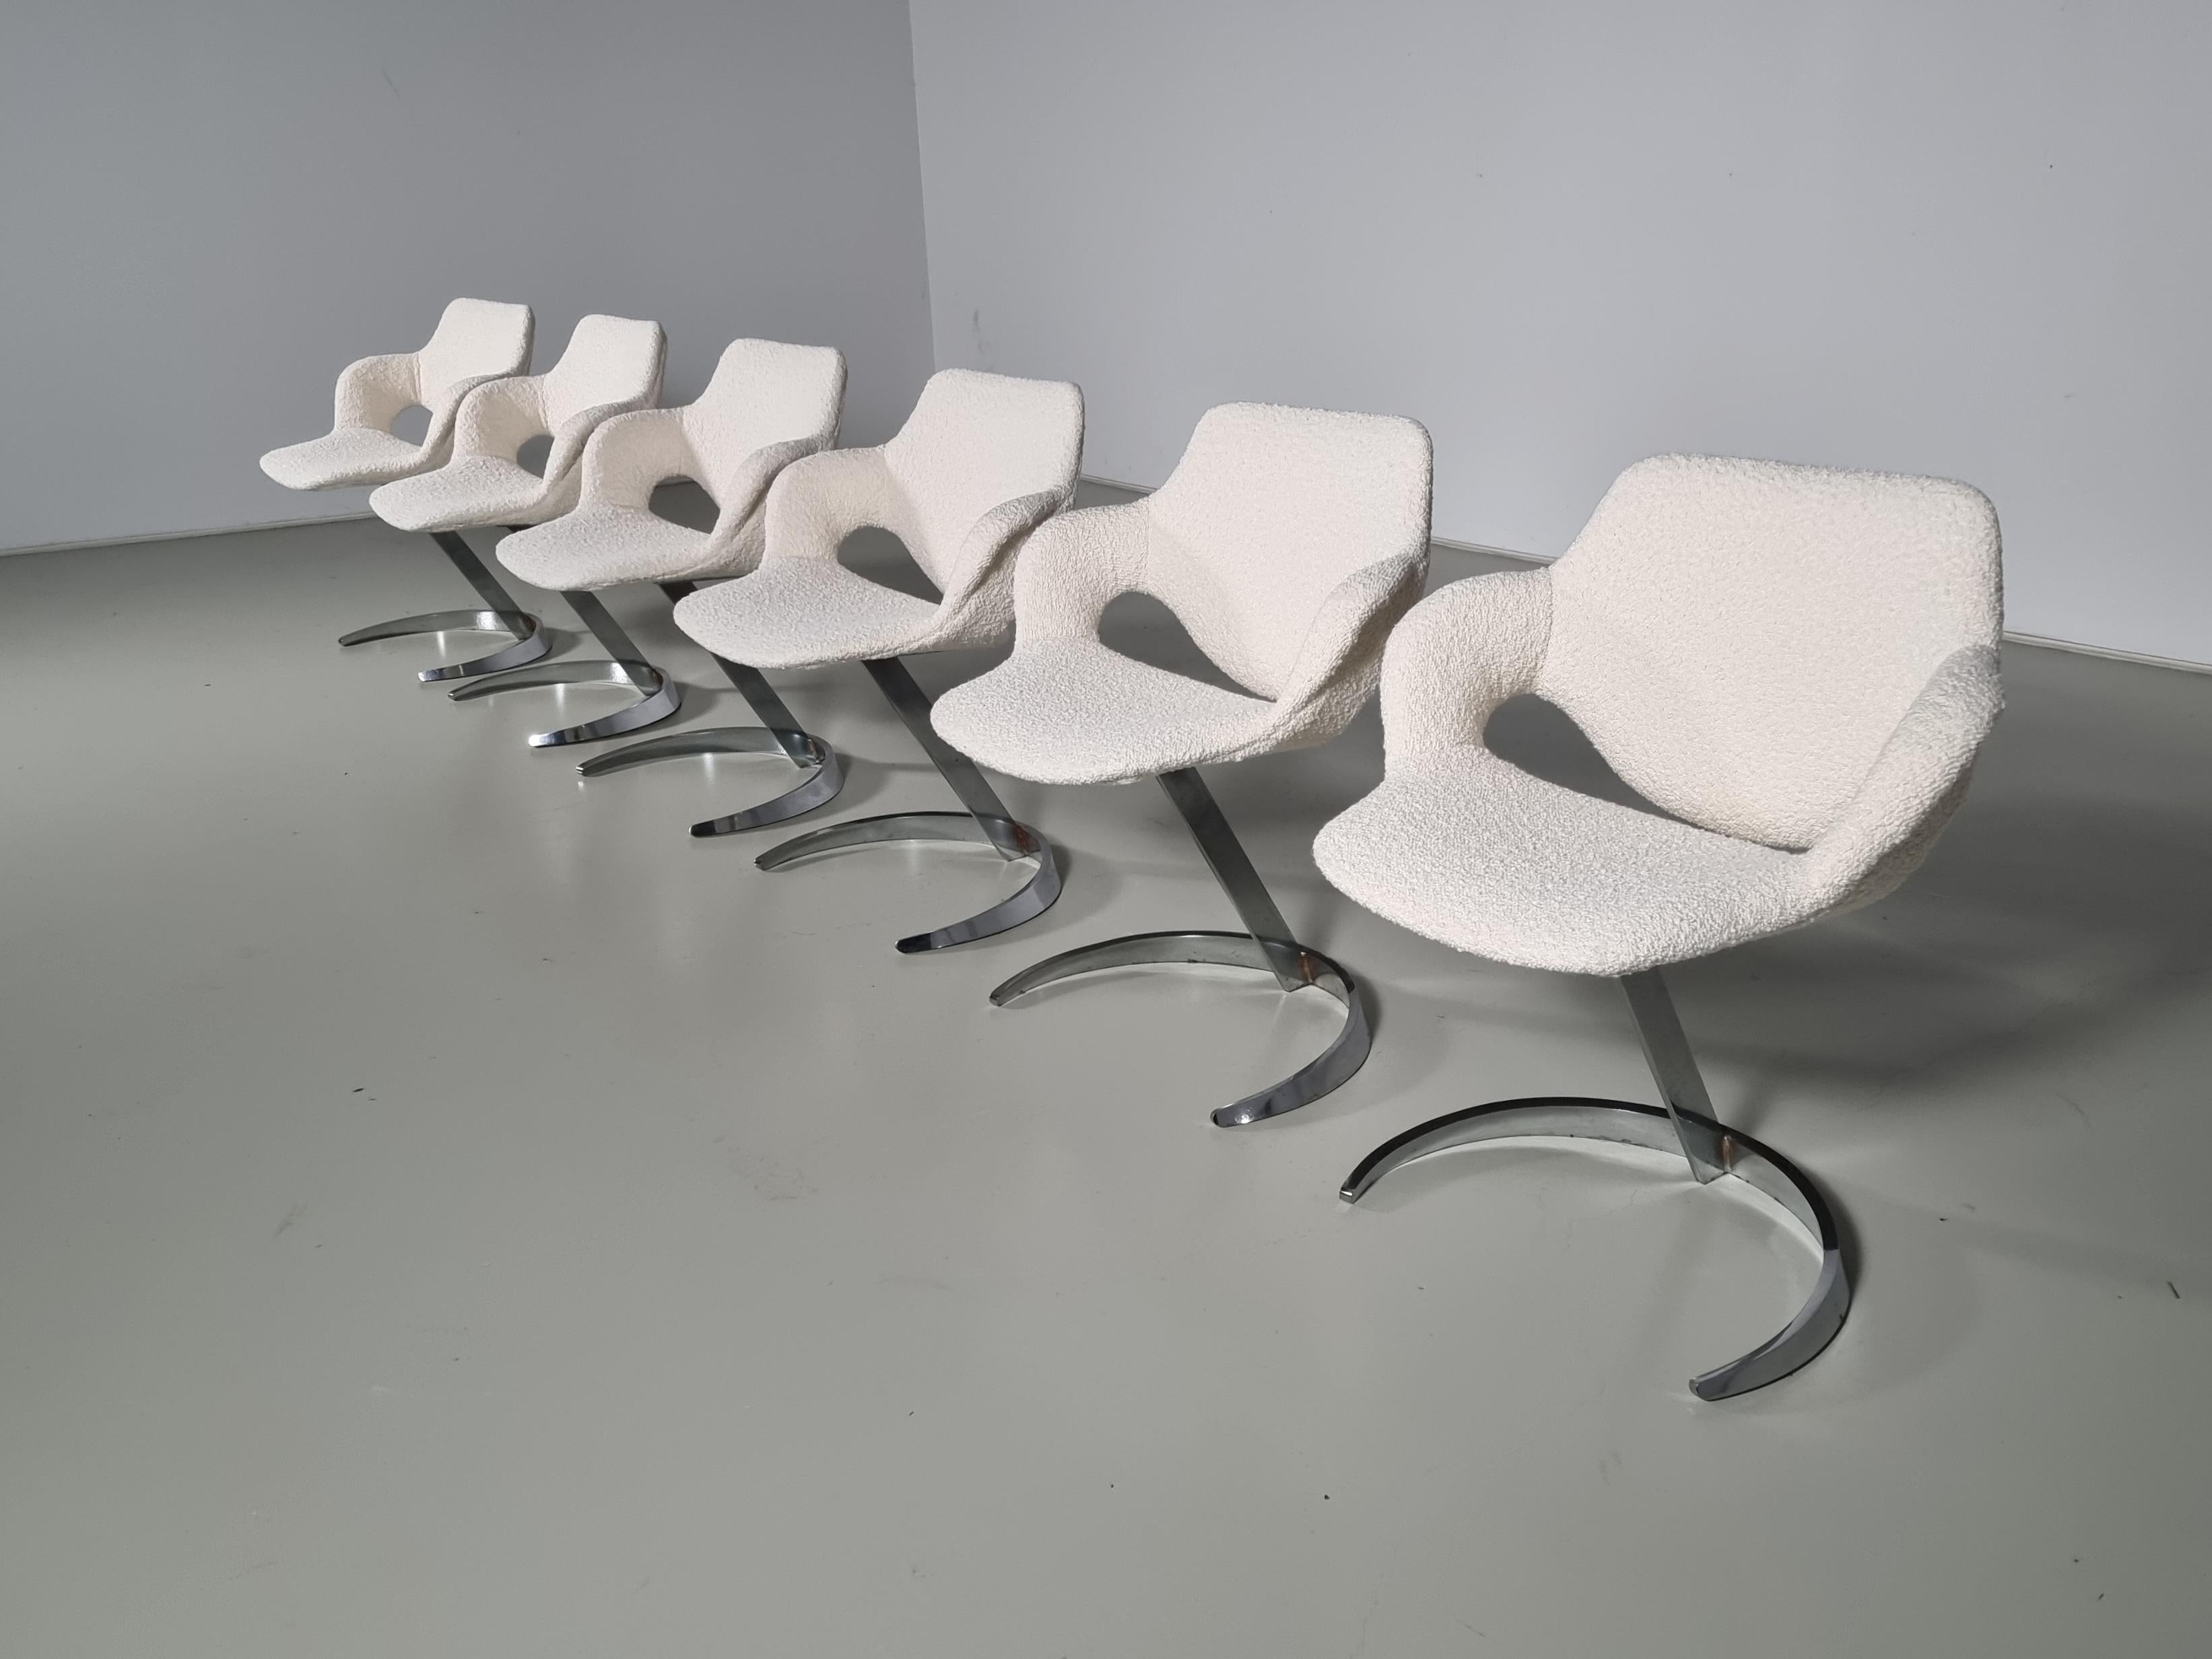 European Set of 6 Boris Tabacoff Scimitar Chairs for 'Mobilier Modulaire Moderne' 'MMM'